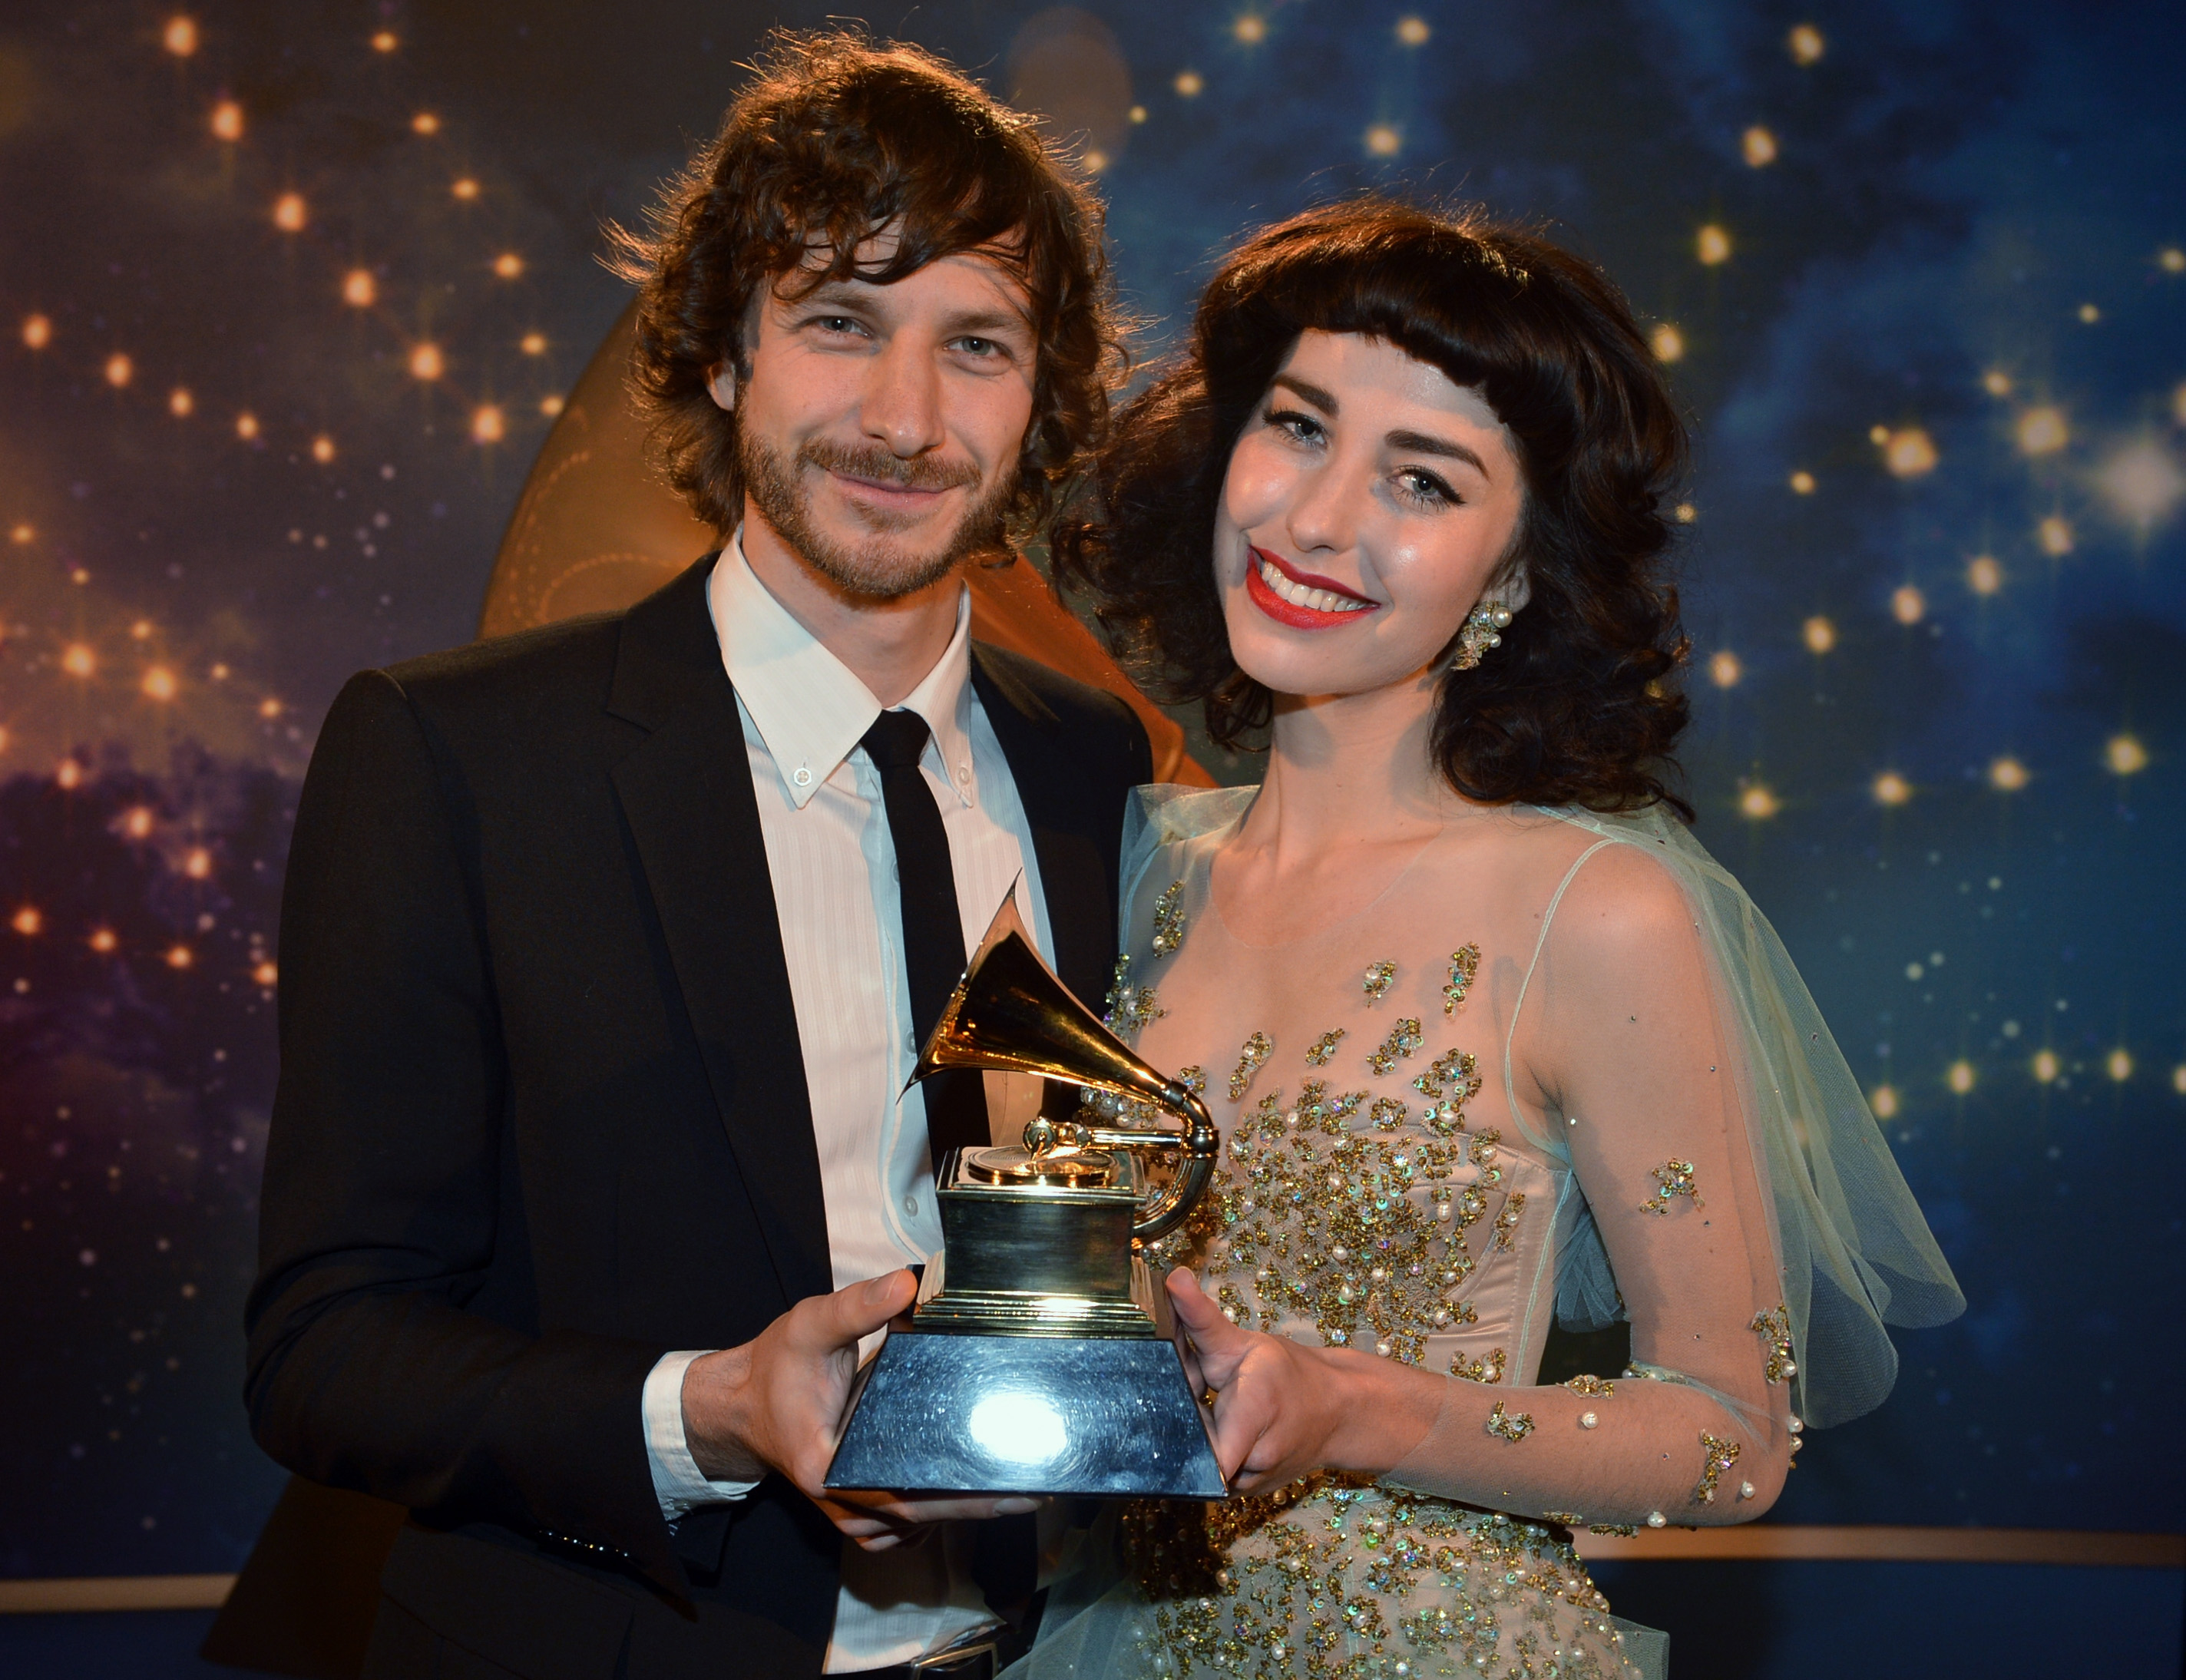 Gotye and Kimbra of "Somebody That I Used to Know" fame standing next to each other